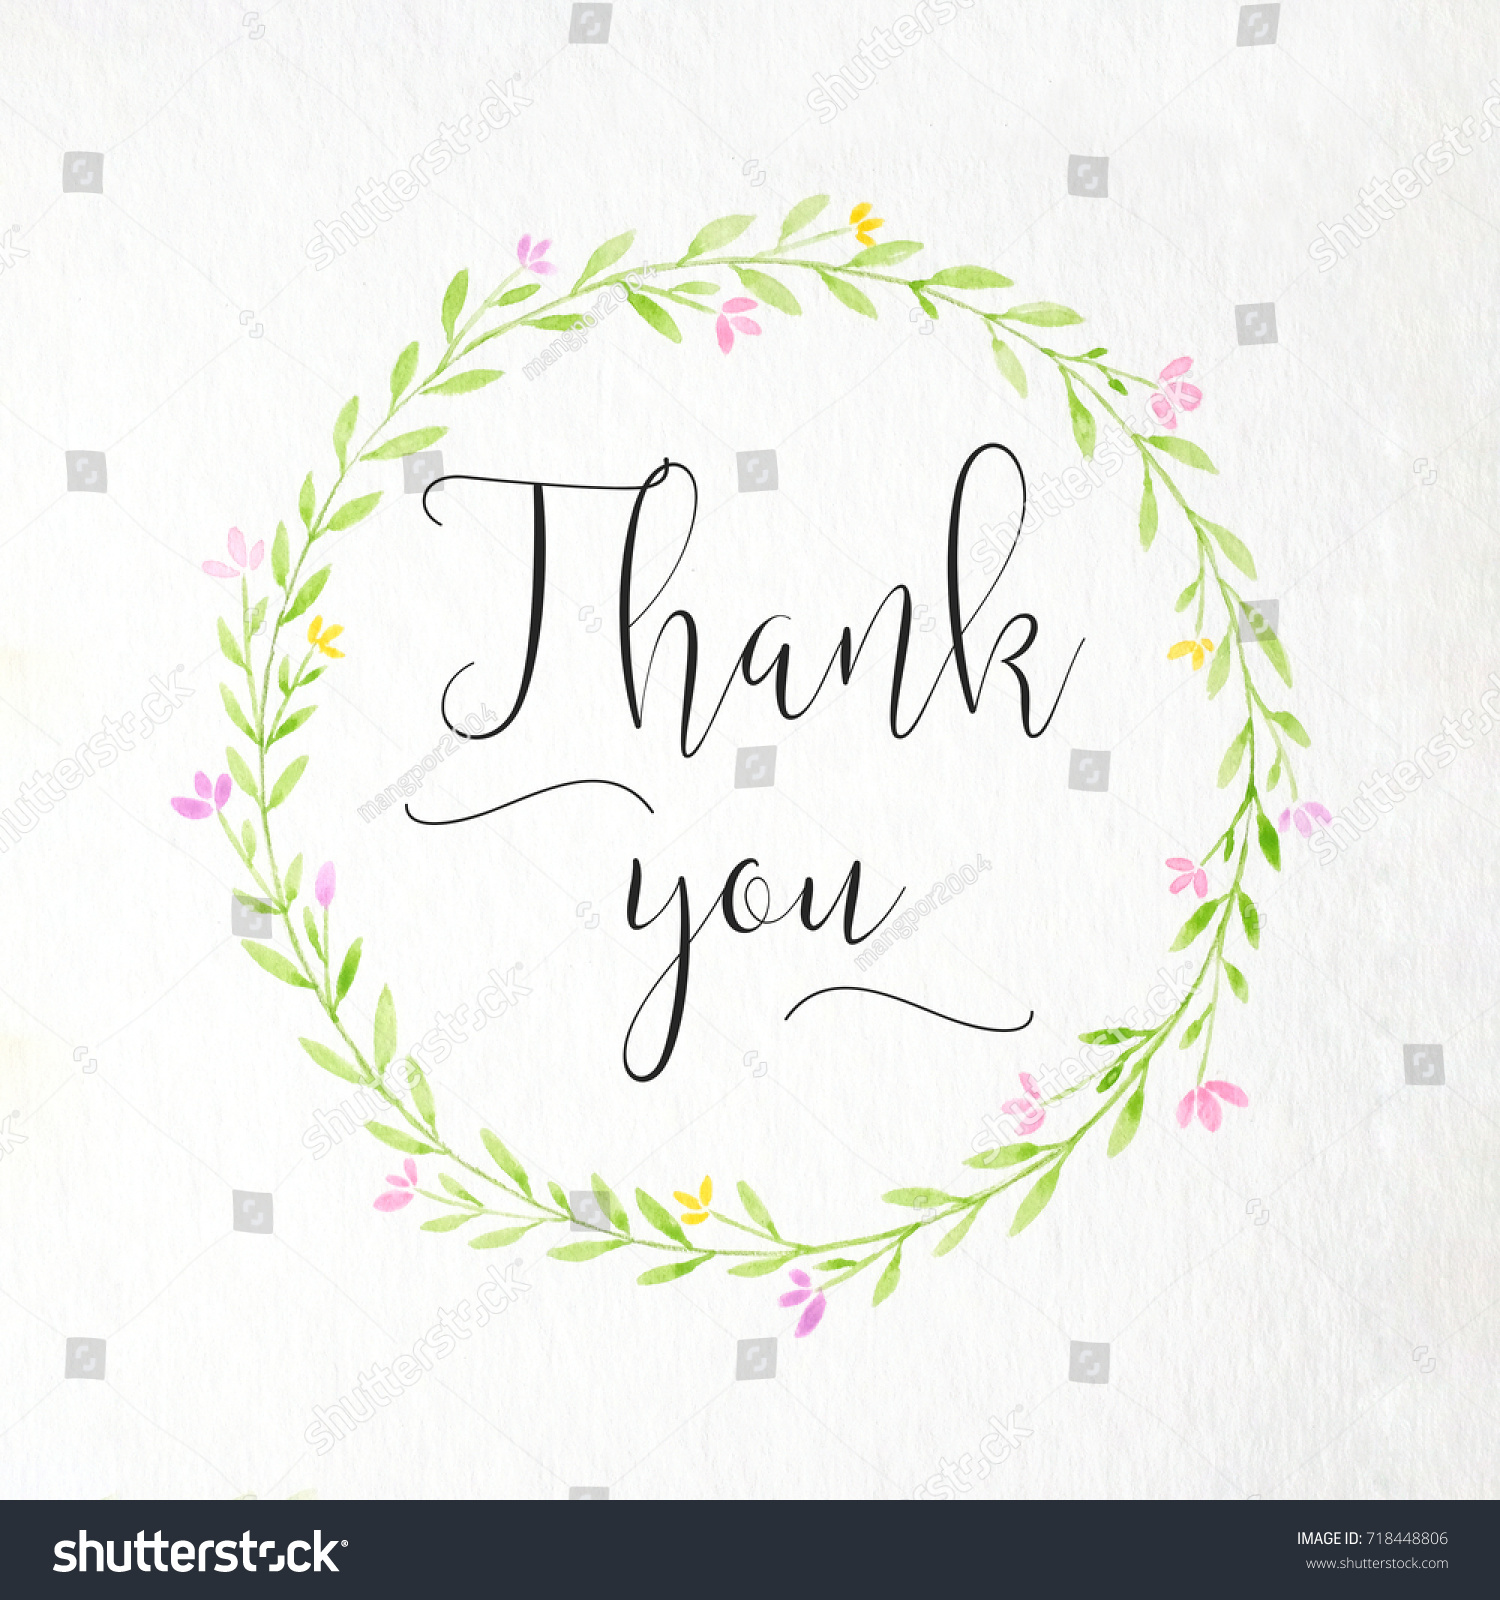 Thank You Word Hand Drawing Watercolor Stock Illustration 718448806 ...